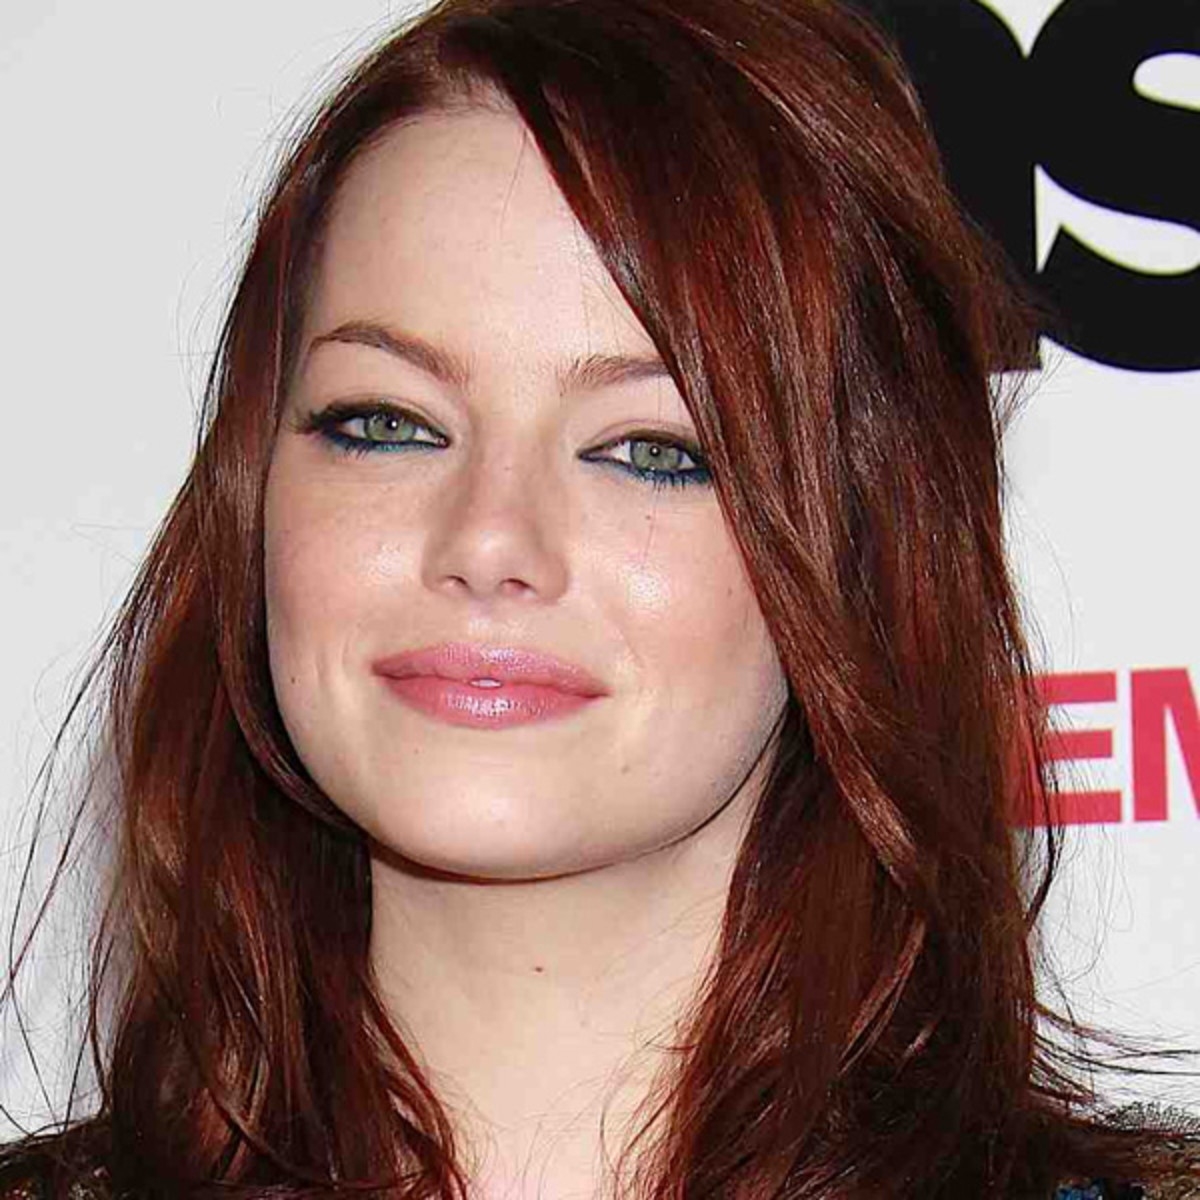 The Best Makeup Tips For Red Hair - The Skincare Edit with regard to Makeup Colors For Redheads With Blue Eyes